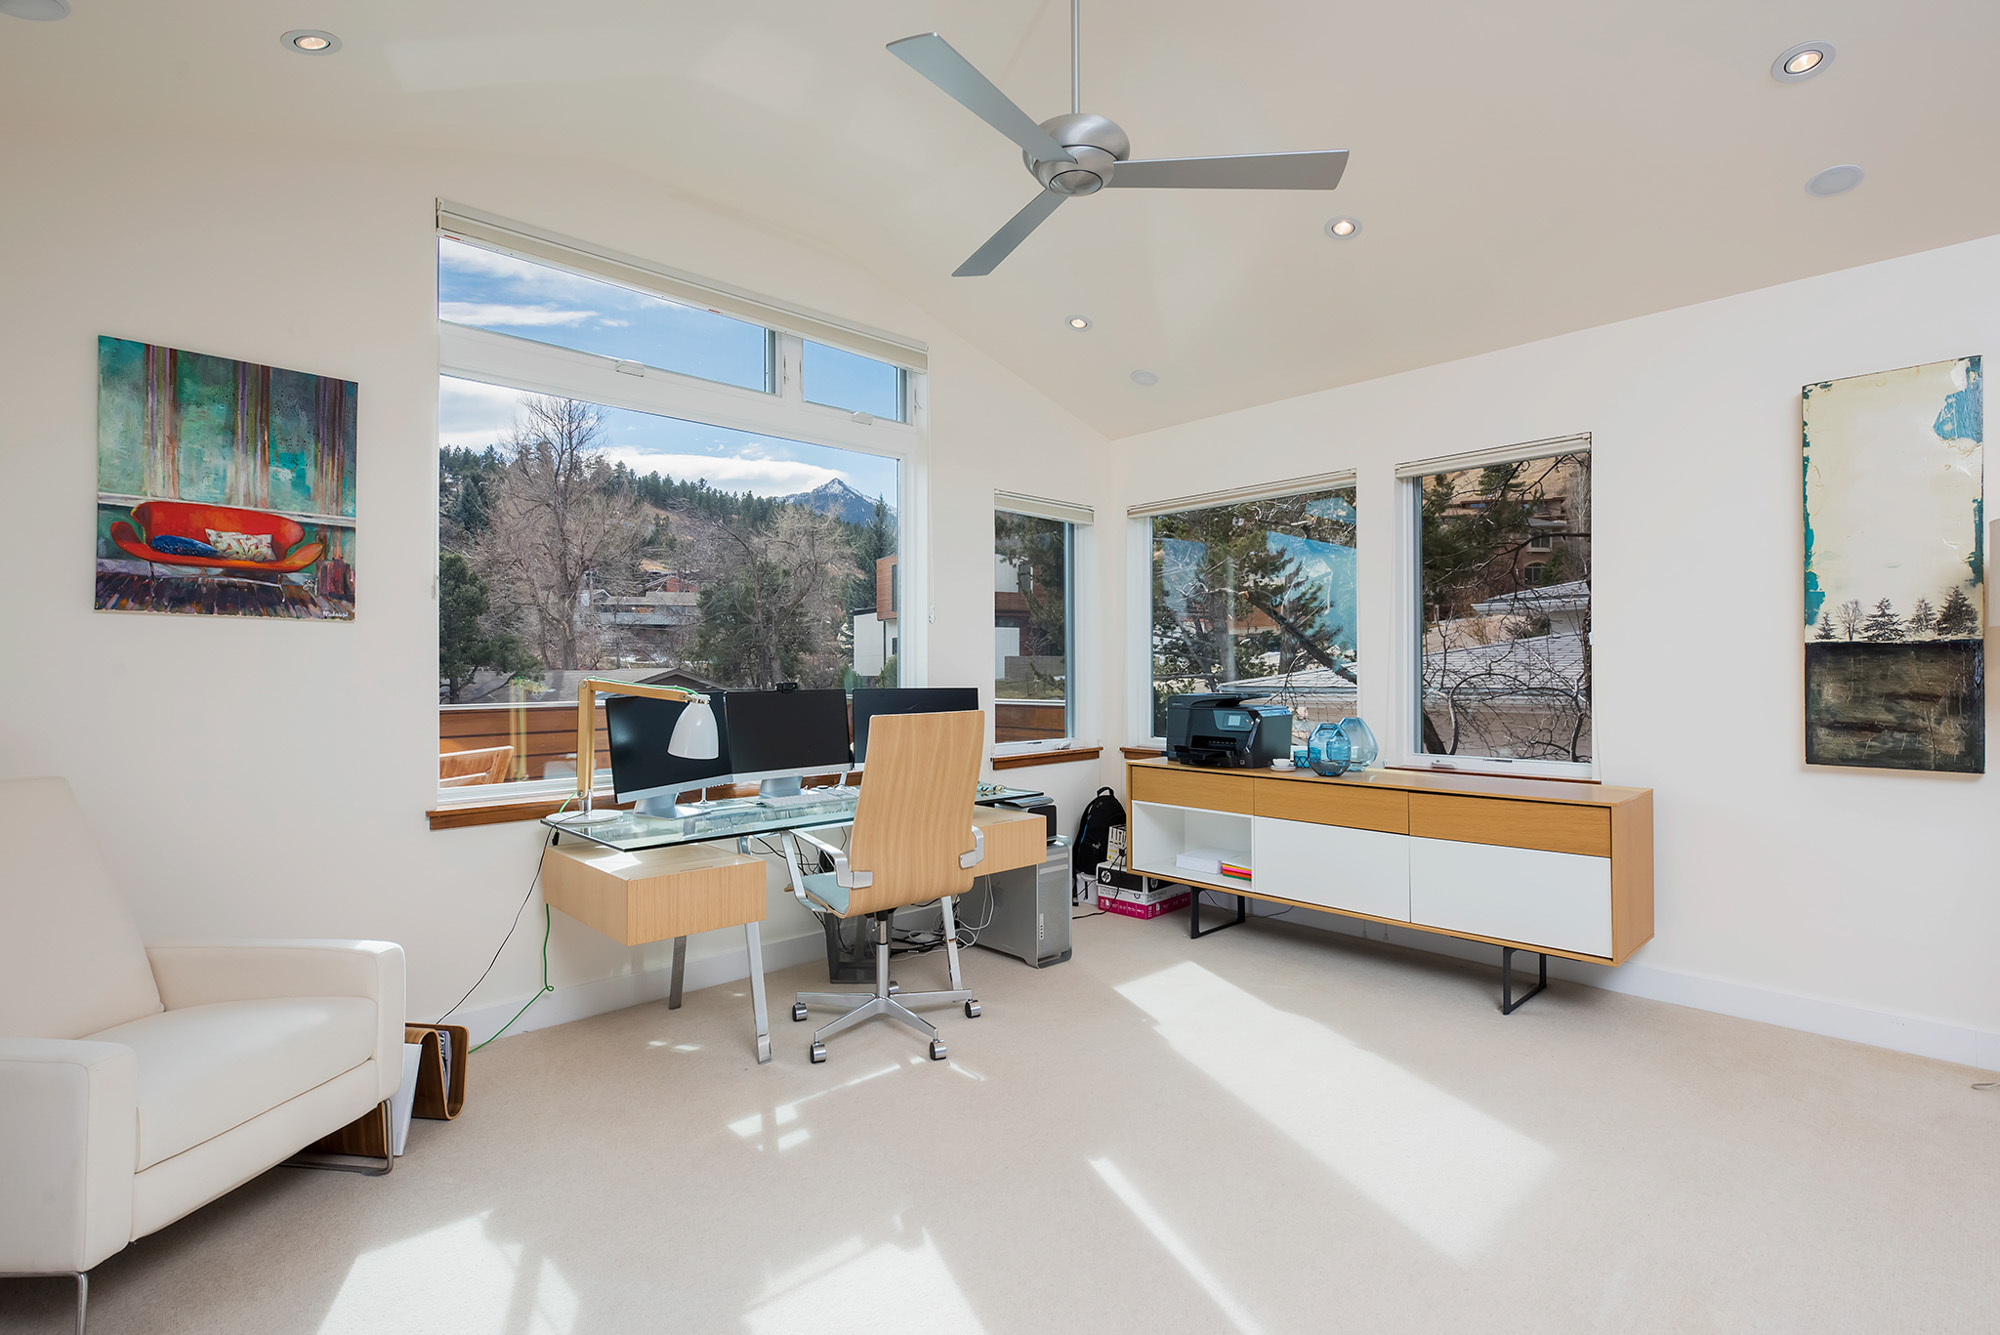 zachary-cornwell-photography-home-real-estate-denver-boulder